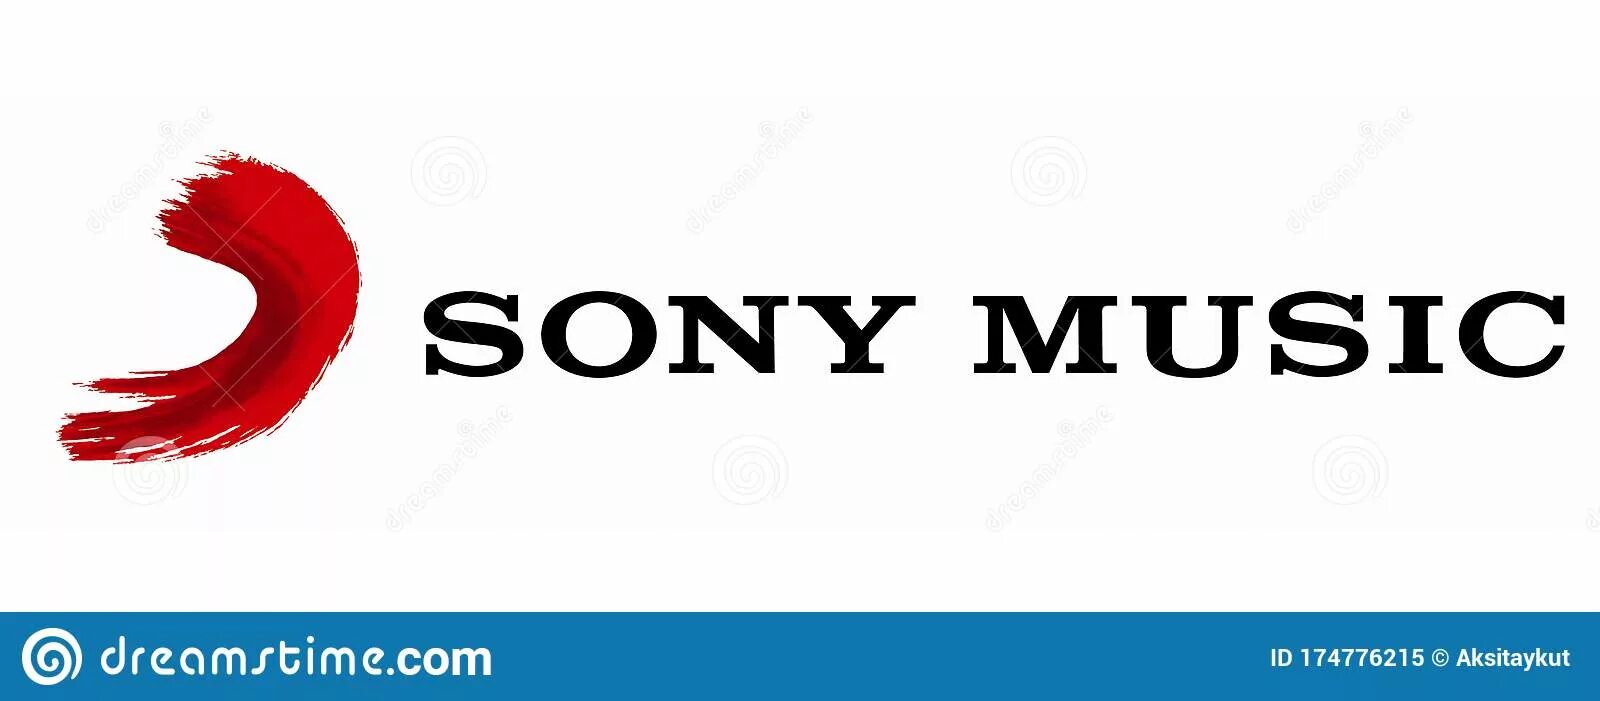 S one music. Sony Music Russia. BMG логотип. MAKERSPLACE. Логотип. Sony Music app.